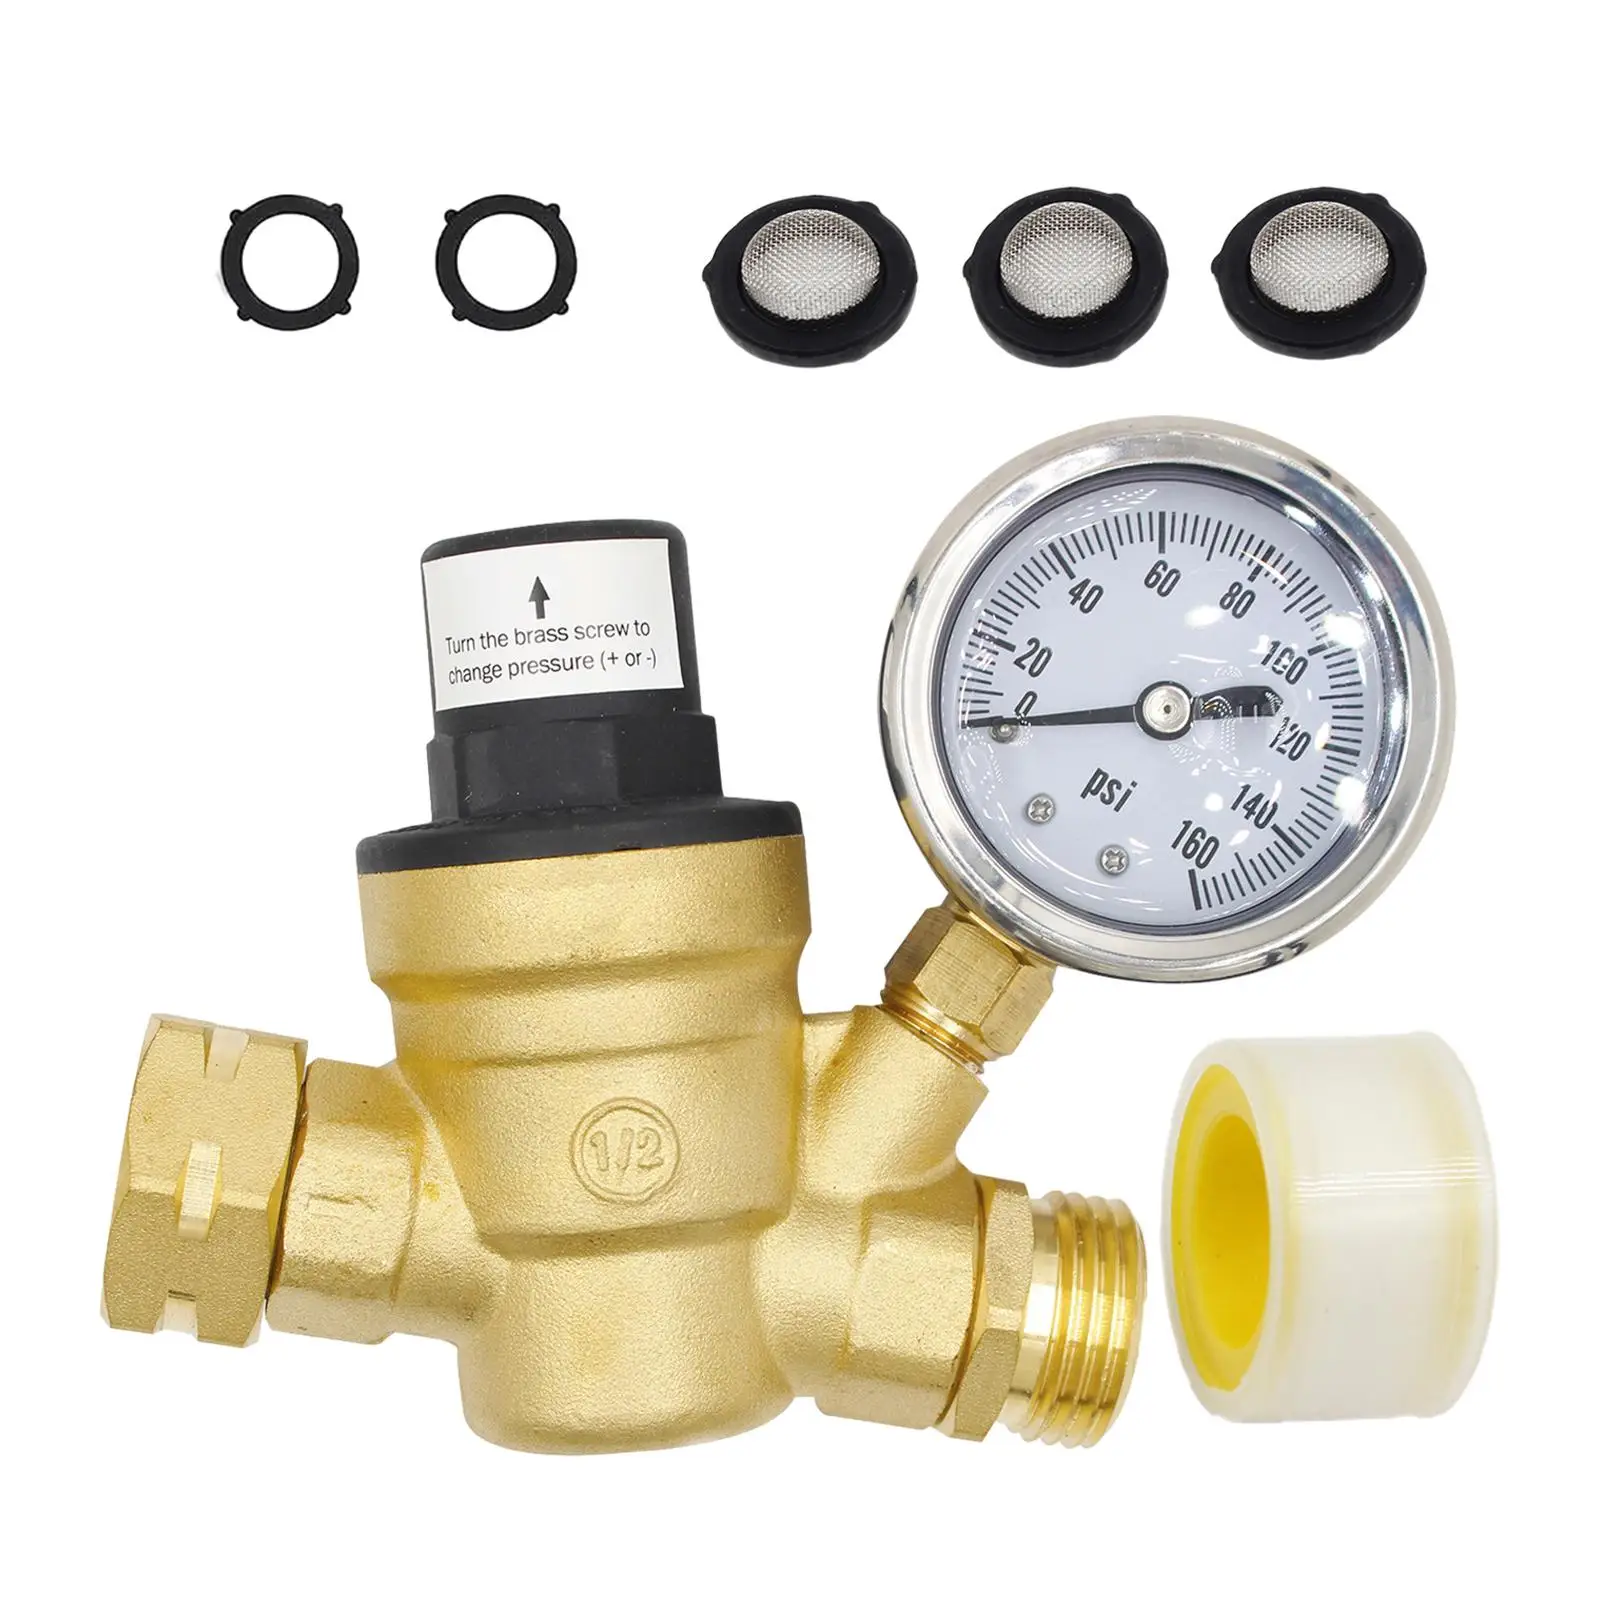 Water Pressure Valve Easy Connection to Faucet 3/4in Plumbing System RV with Gauge 160PSI Garden Water Pressure Reducing Valve